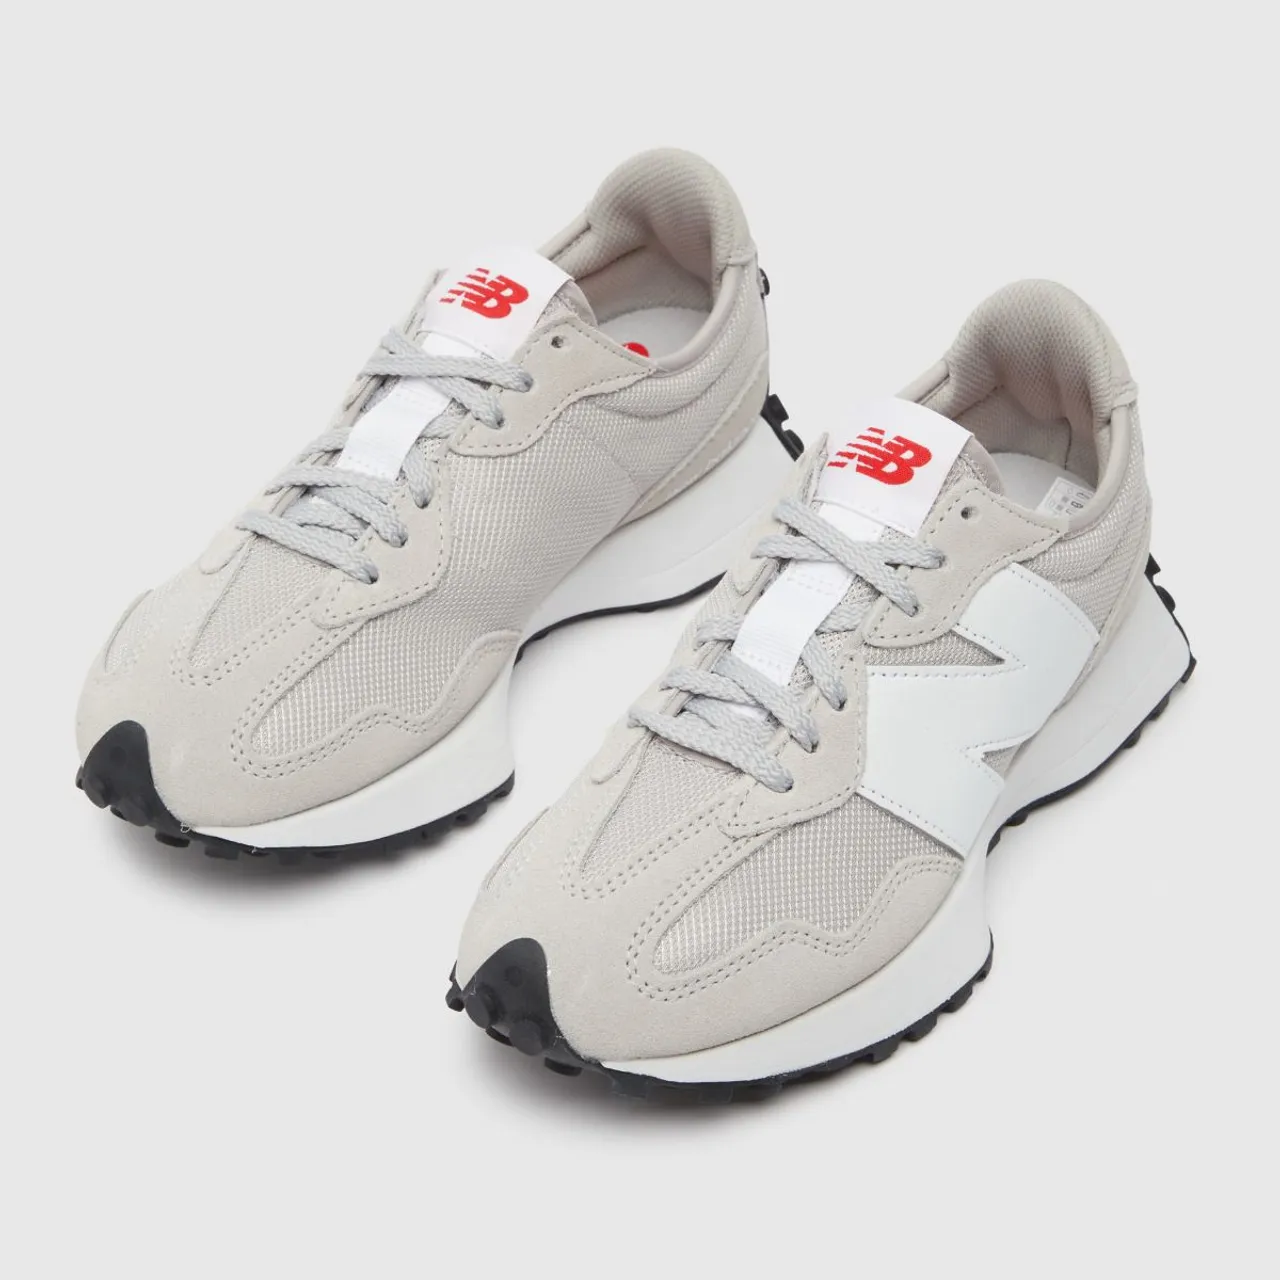 New Balance 327 Trainers In Light Grey